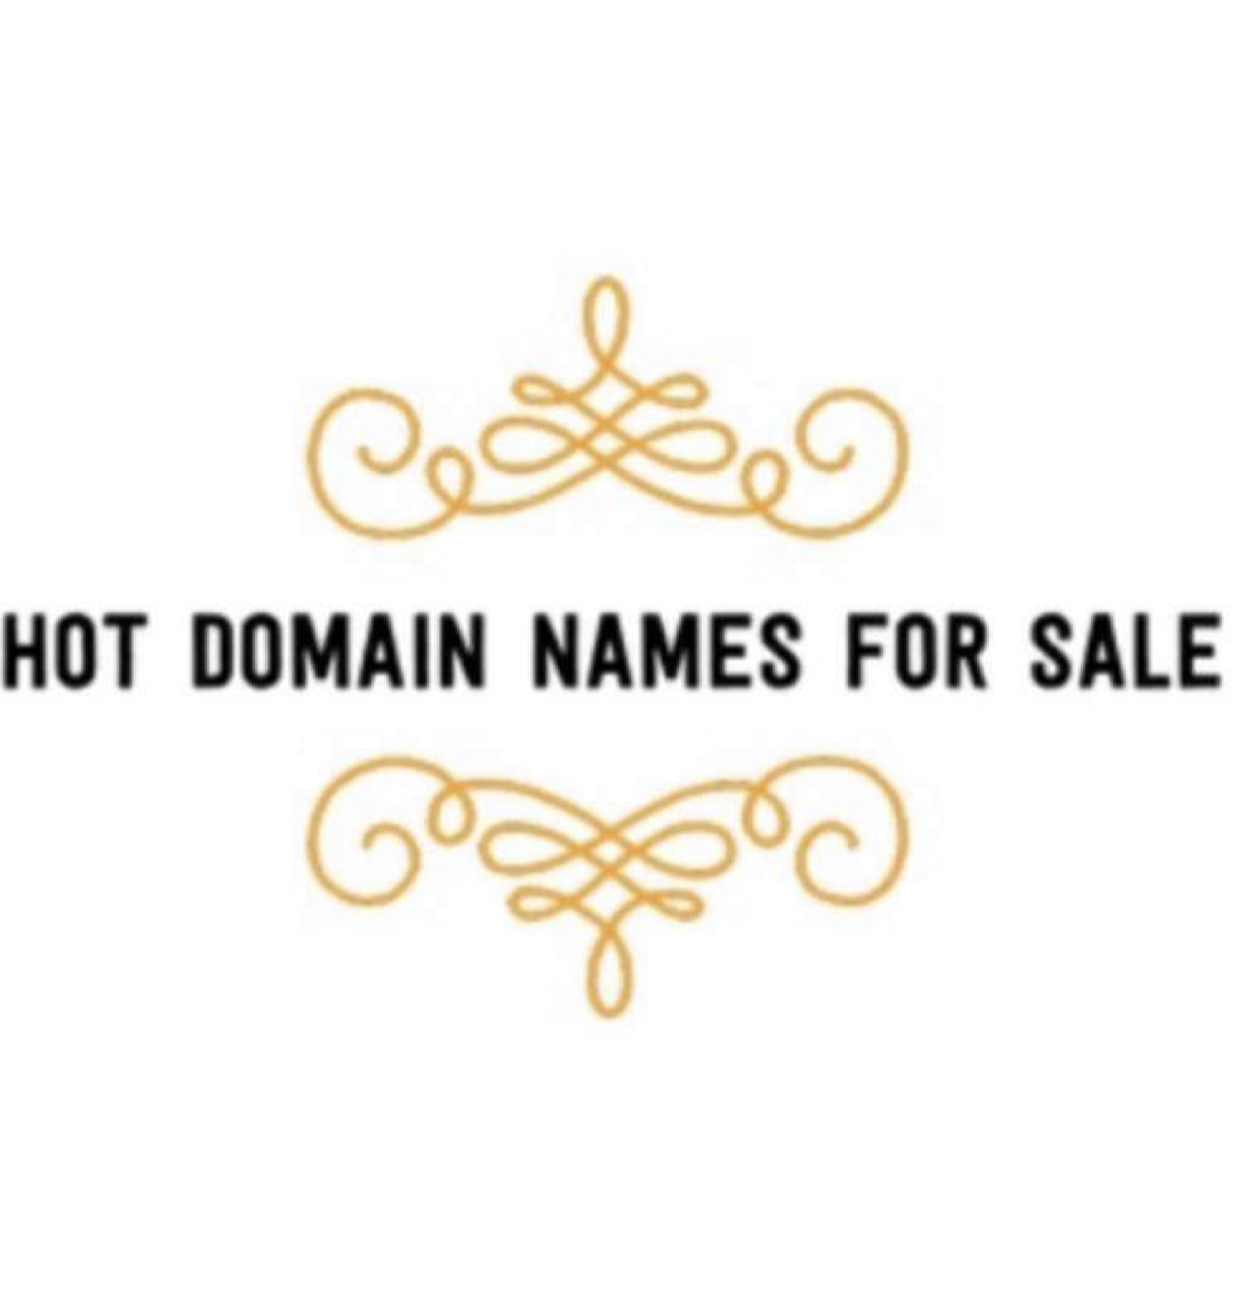 Anonymous Business To Sell A Set Of Domain Names To Aid The Search For Brian Laundrie